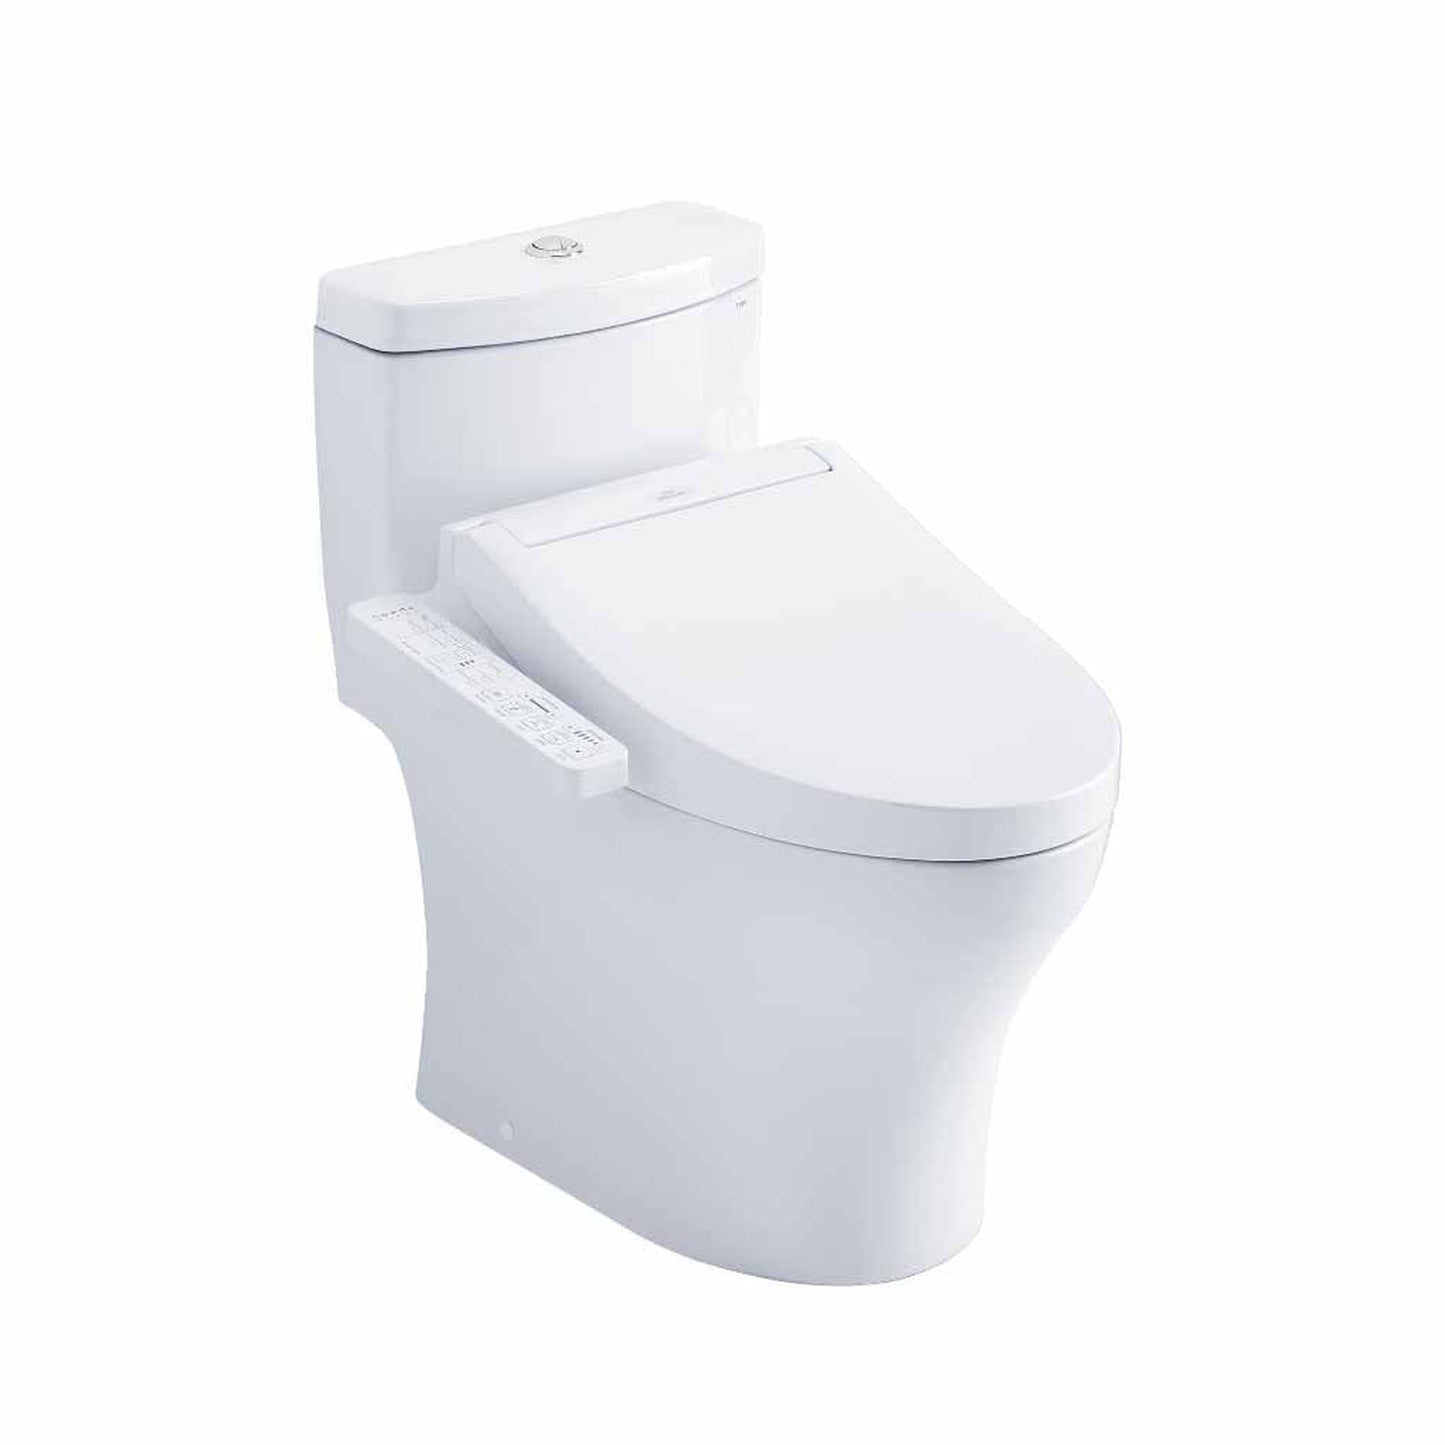 TOTO Aquia IV Cotton White 1.0 GPF & 0.8 GPF Dual-Flush Two-Piece Elongated Chair Height Toilet With WASHLET+ C2